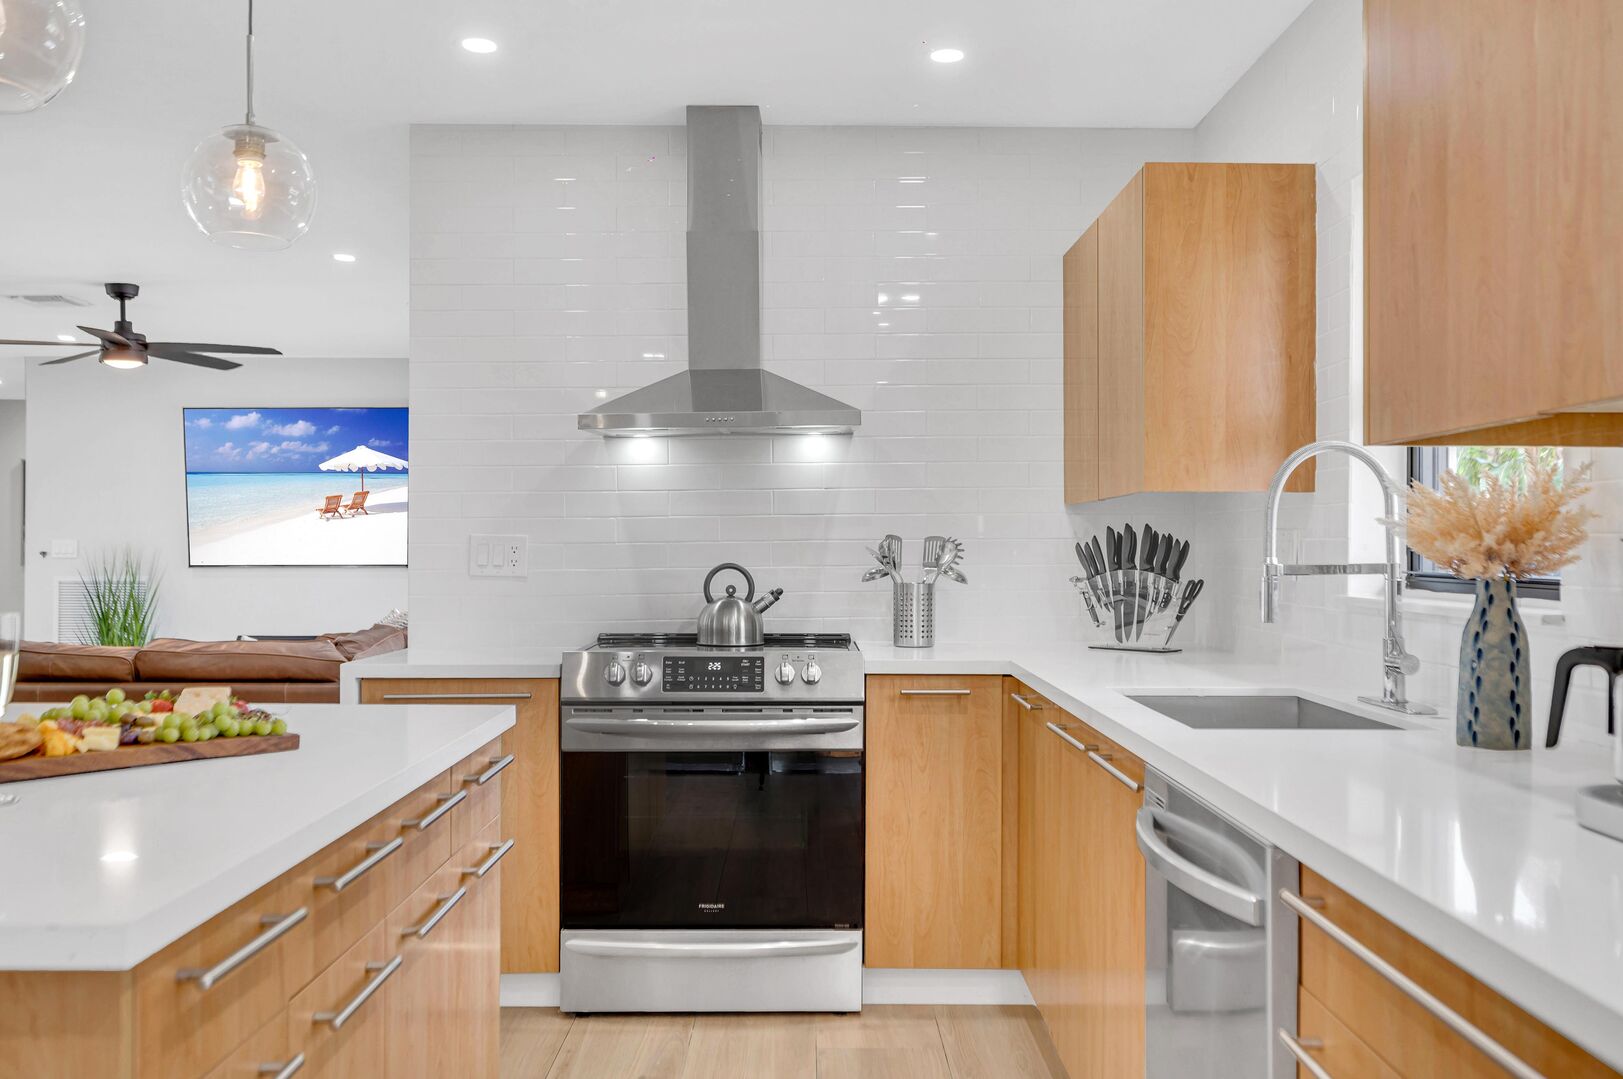 The kitchen comes with sleek countertops, modern appliances and bar seating for two people.